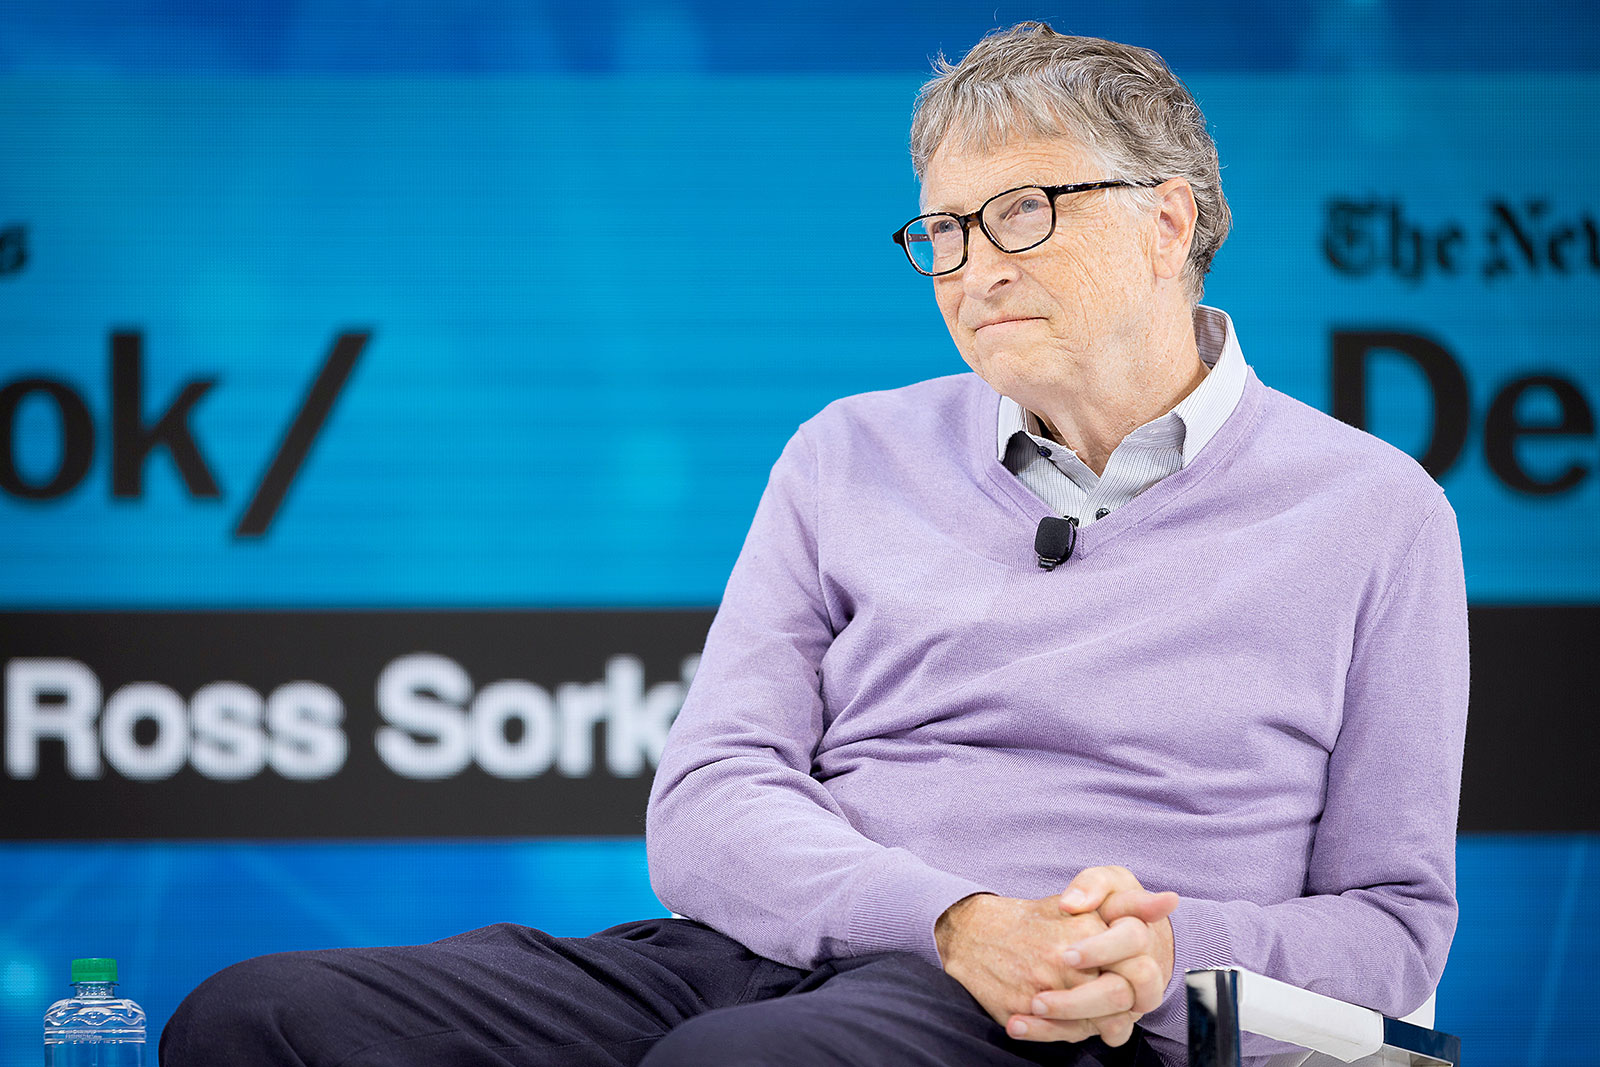 Bill Gates looks on during the New York Times Dealbook event in New York City in 2019.